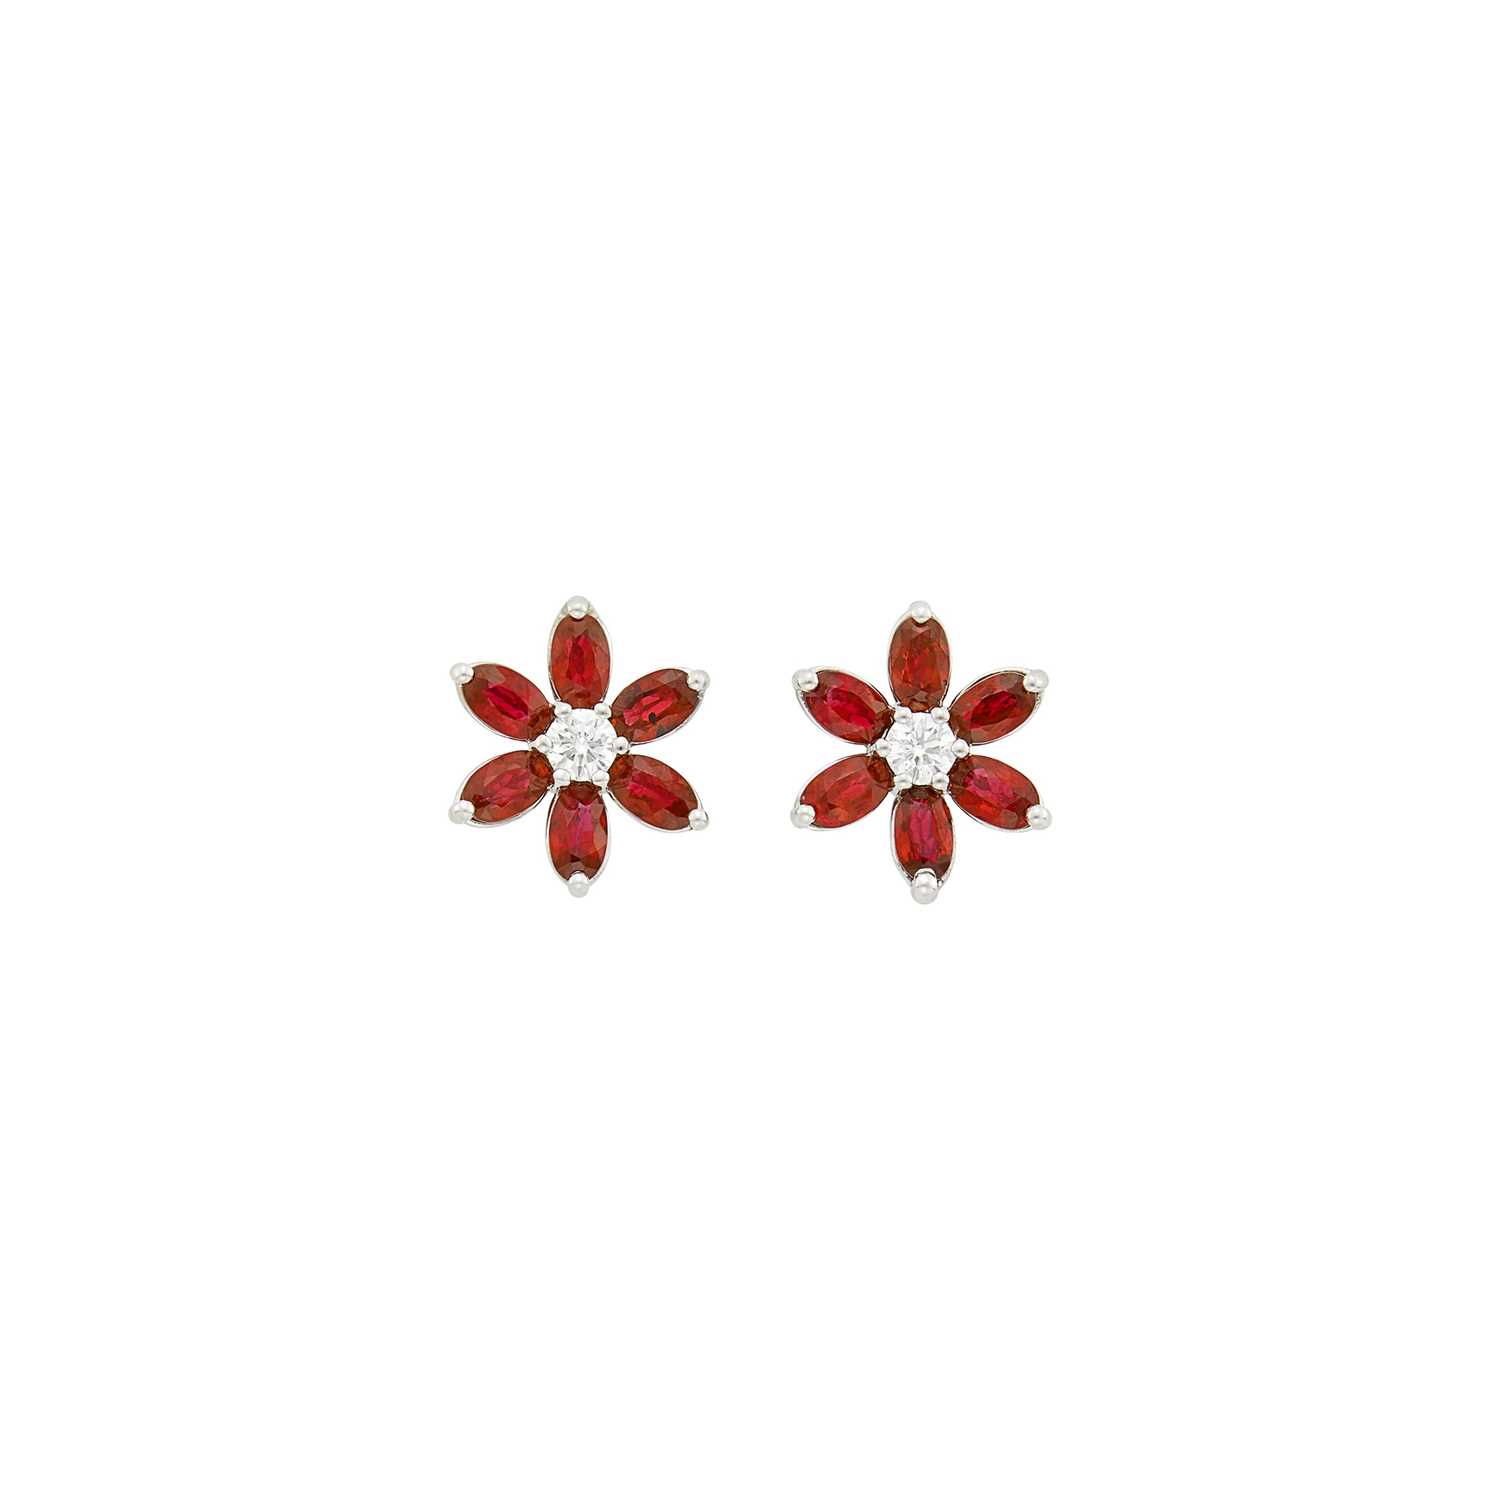 Lot 57 - Pair of Platinum, Ruby and Diamond Floret Earrings